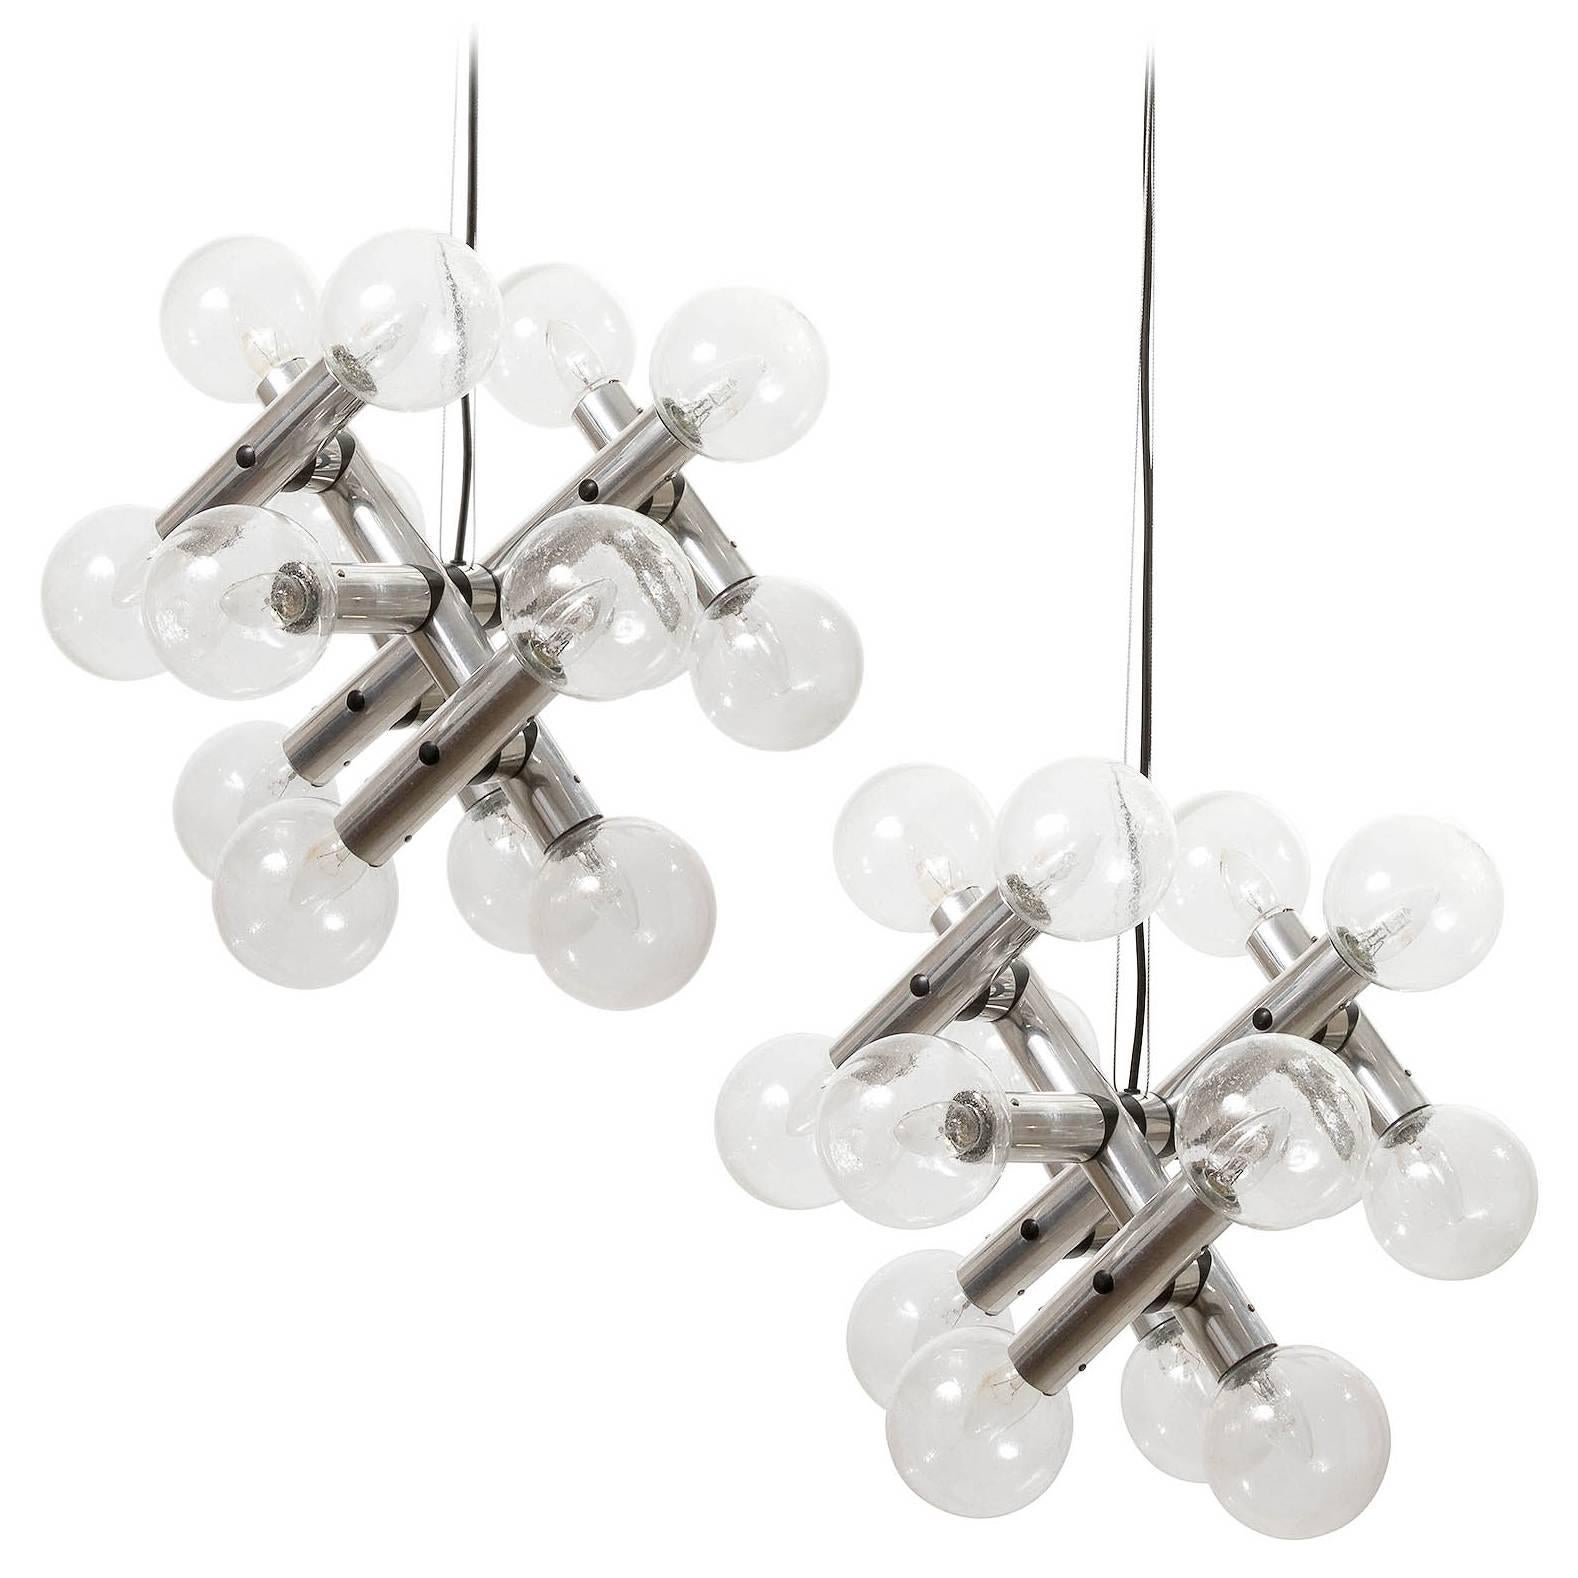 A set of three rare and fantastic 14-arm sputnik chandeliers / pendant lights model 'RS 14 HL' by Kalmar, manufactured in Mid-Century, circa 1970 (late 1960s or early 1970s). 
They are made of  polished aluminum and handblown bubble glass lamp